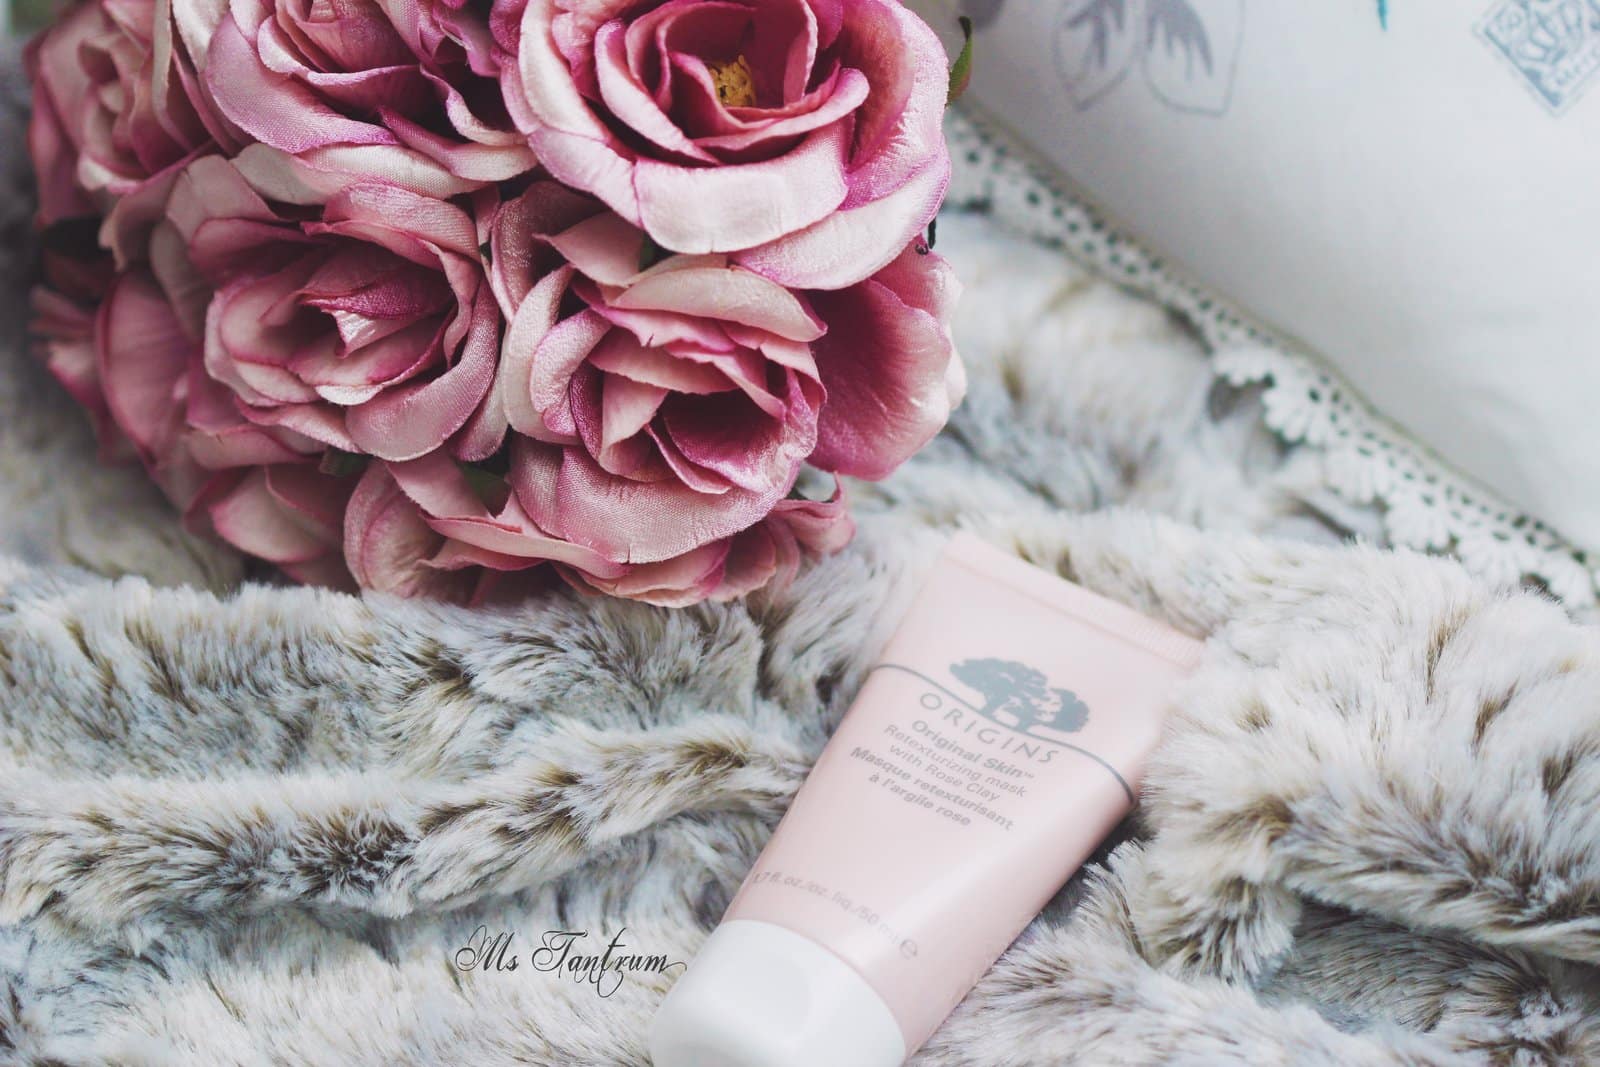 Origins Retexturizing mask with Rose Clay Review